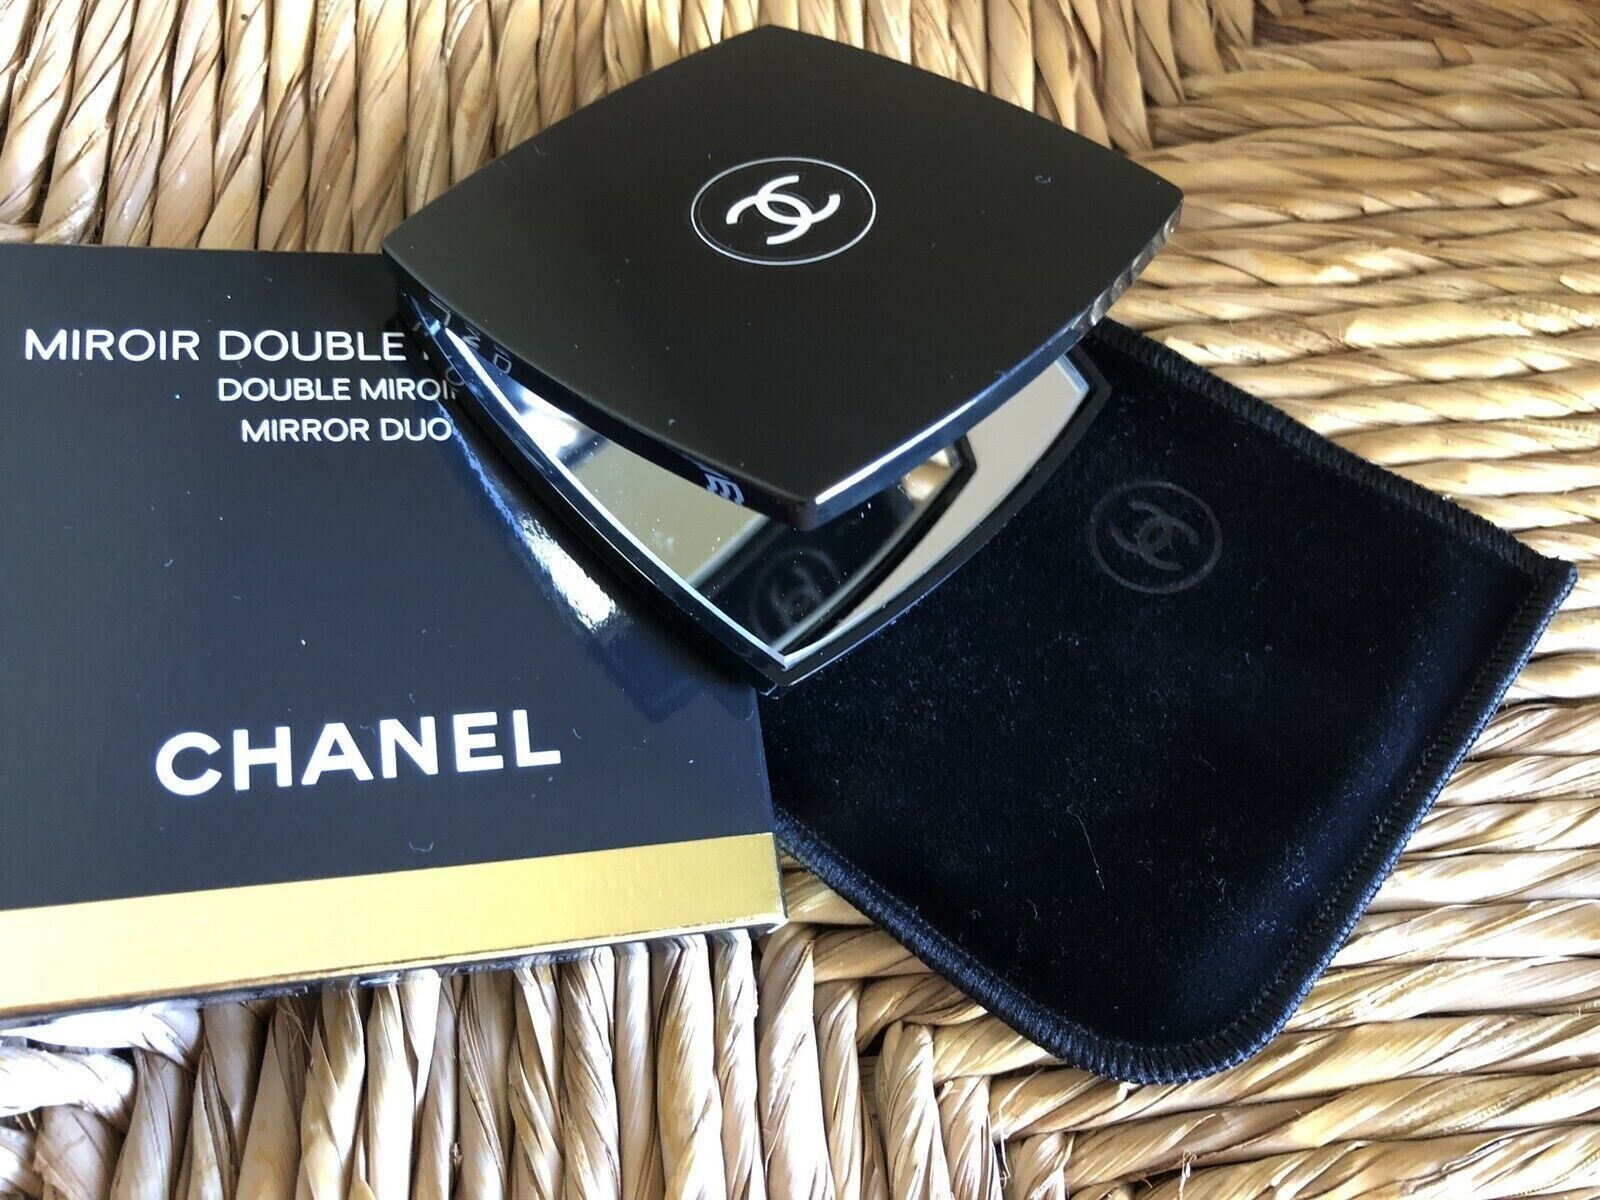 CHANEL Beauty Compact Miroir Double Facettes Mirror Duo Side NIB NEWLY BRAND NEW